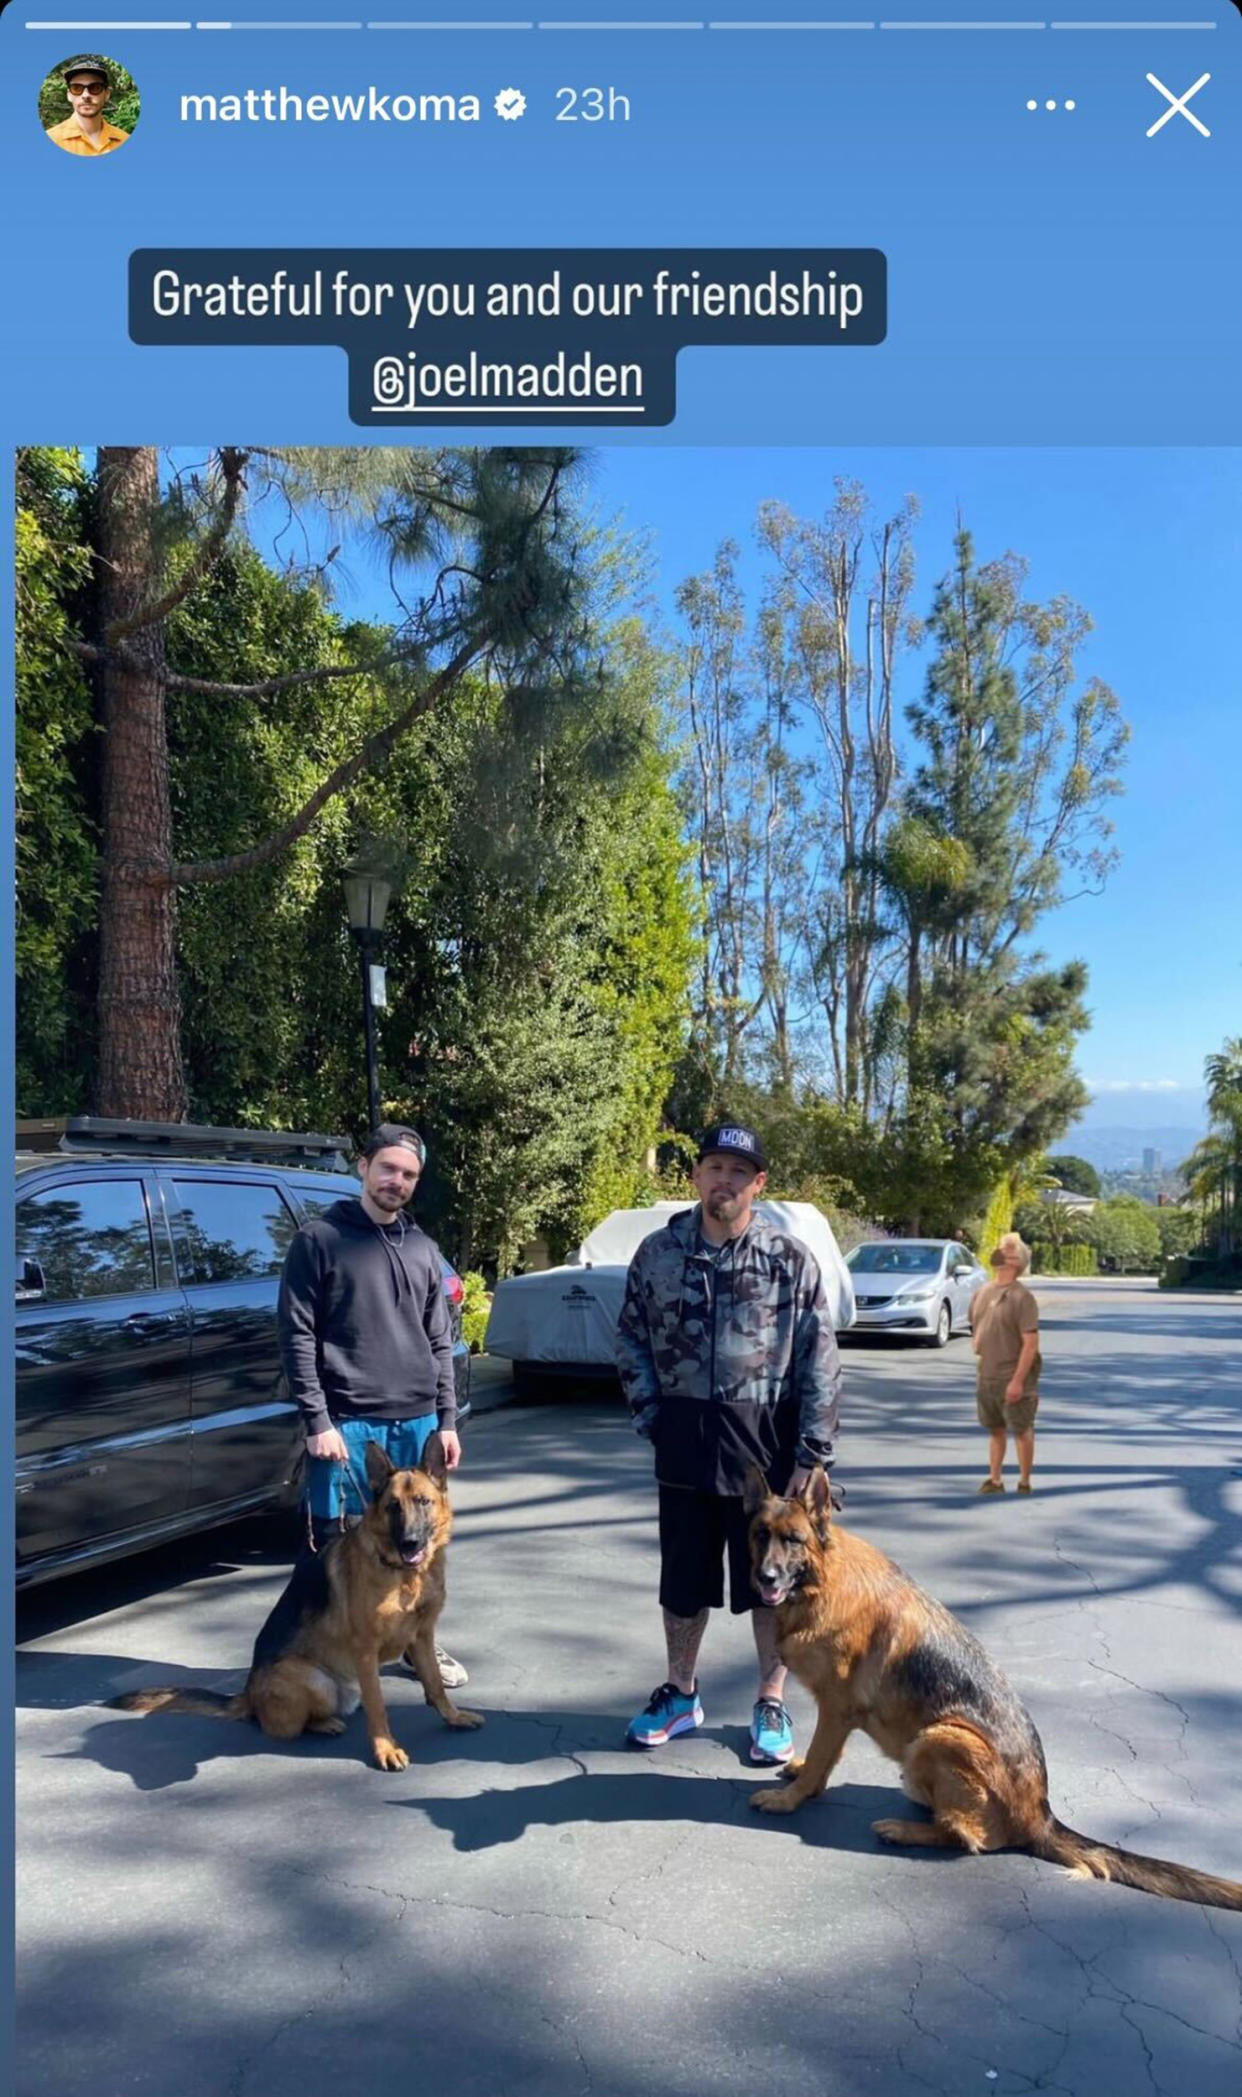 Joel and Matthew hanging out with some friendly dogs. (Matthew Koma / Instagram)